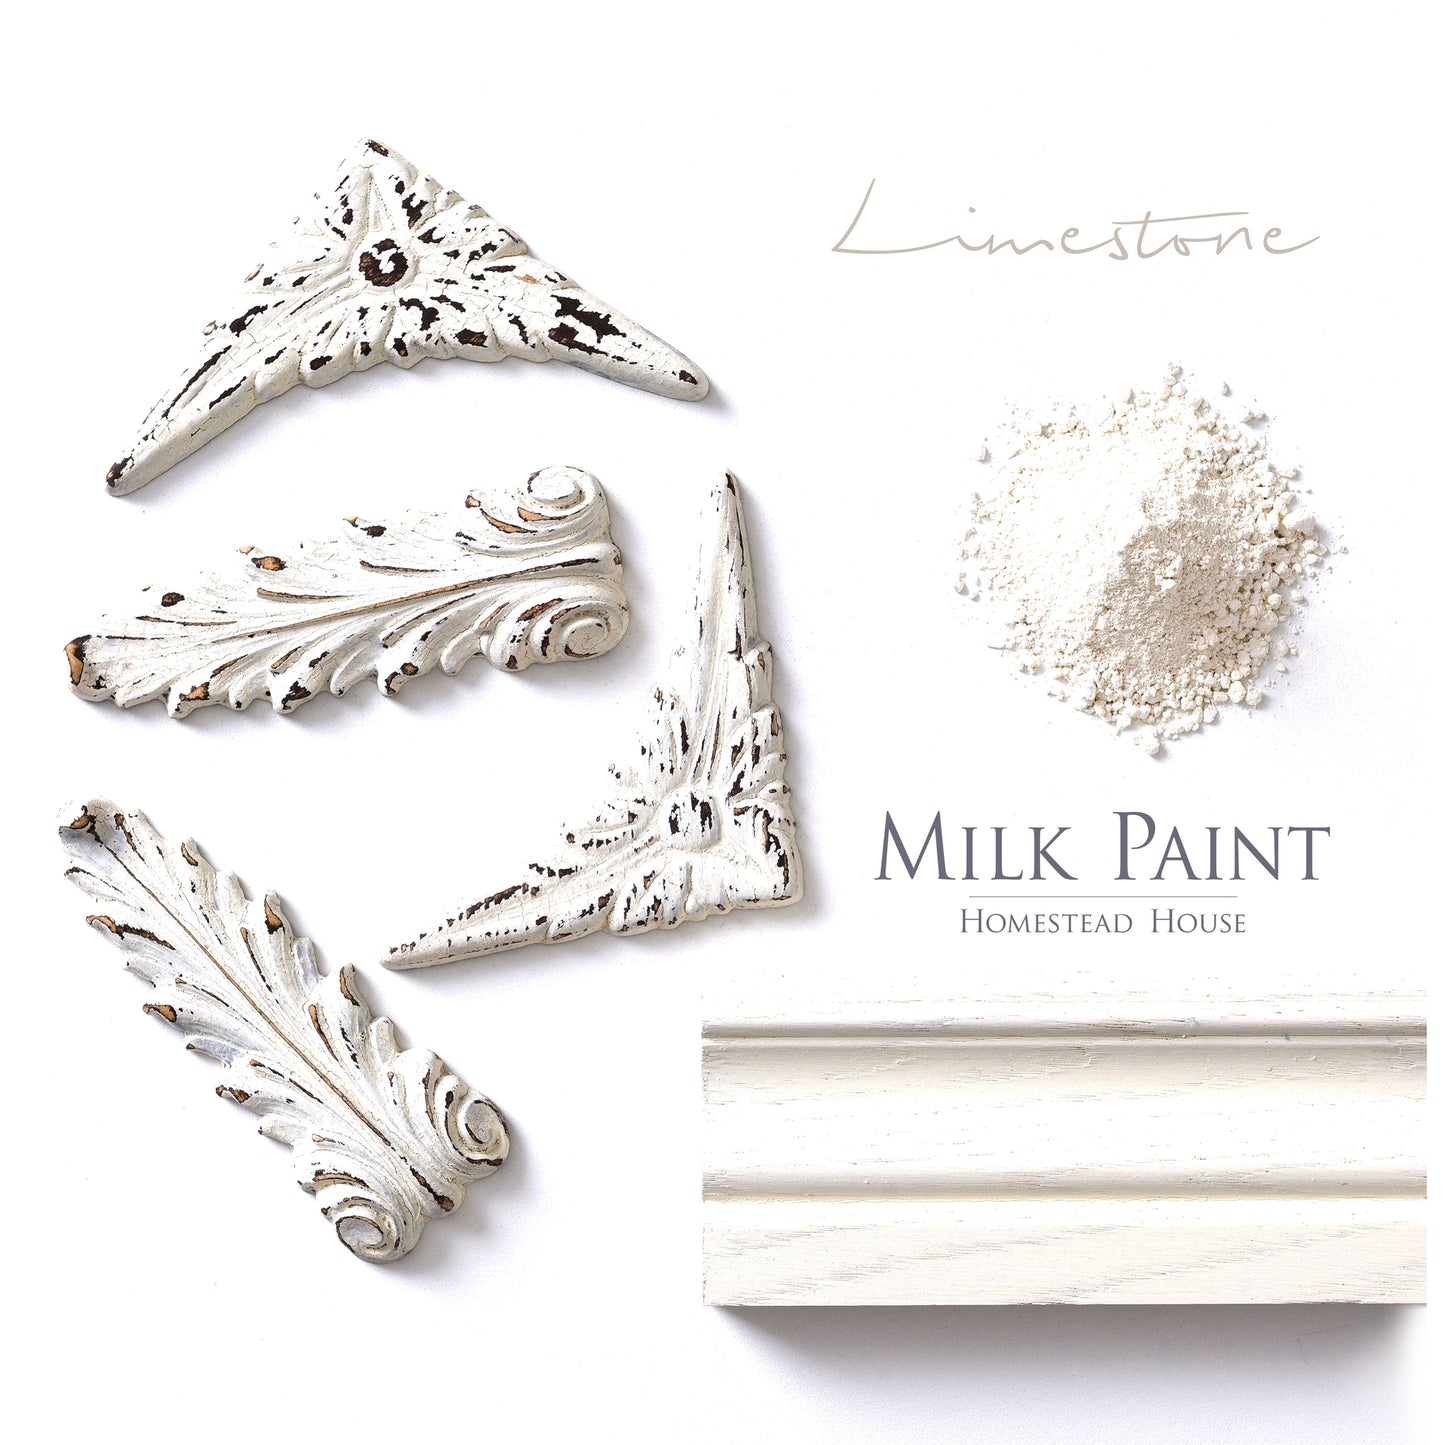 Milk Paint from Homestead House in Limestone, This old stone white has just a hint of earthy yellow. | homesteadhouse.ca